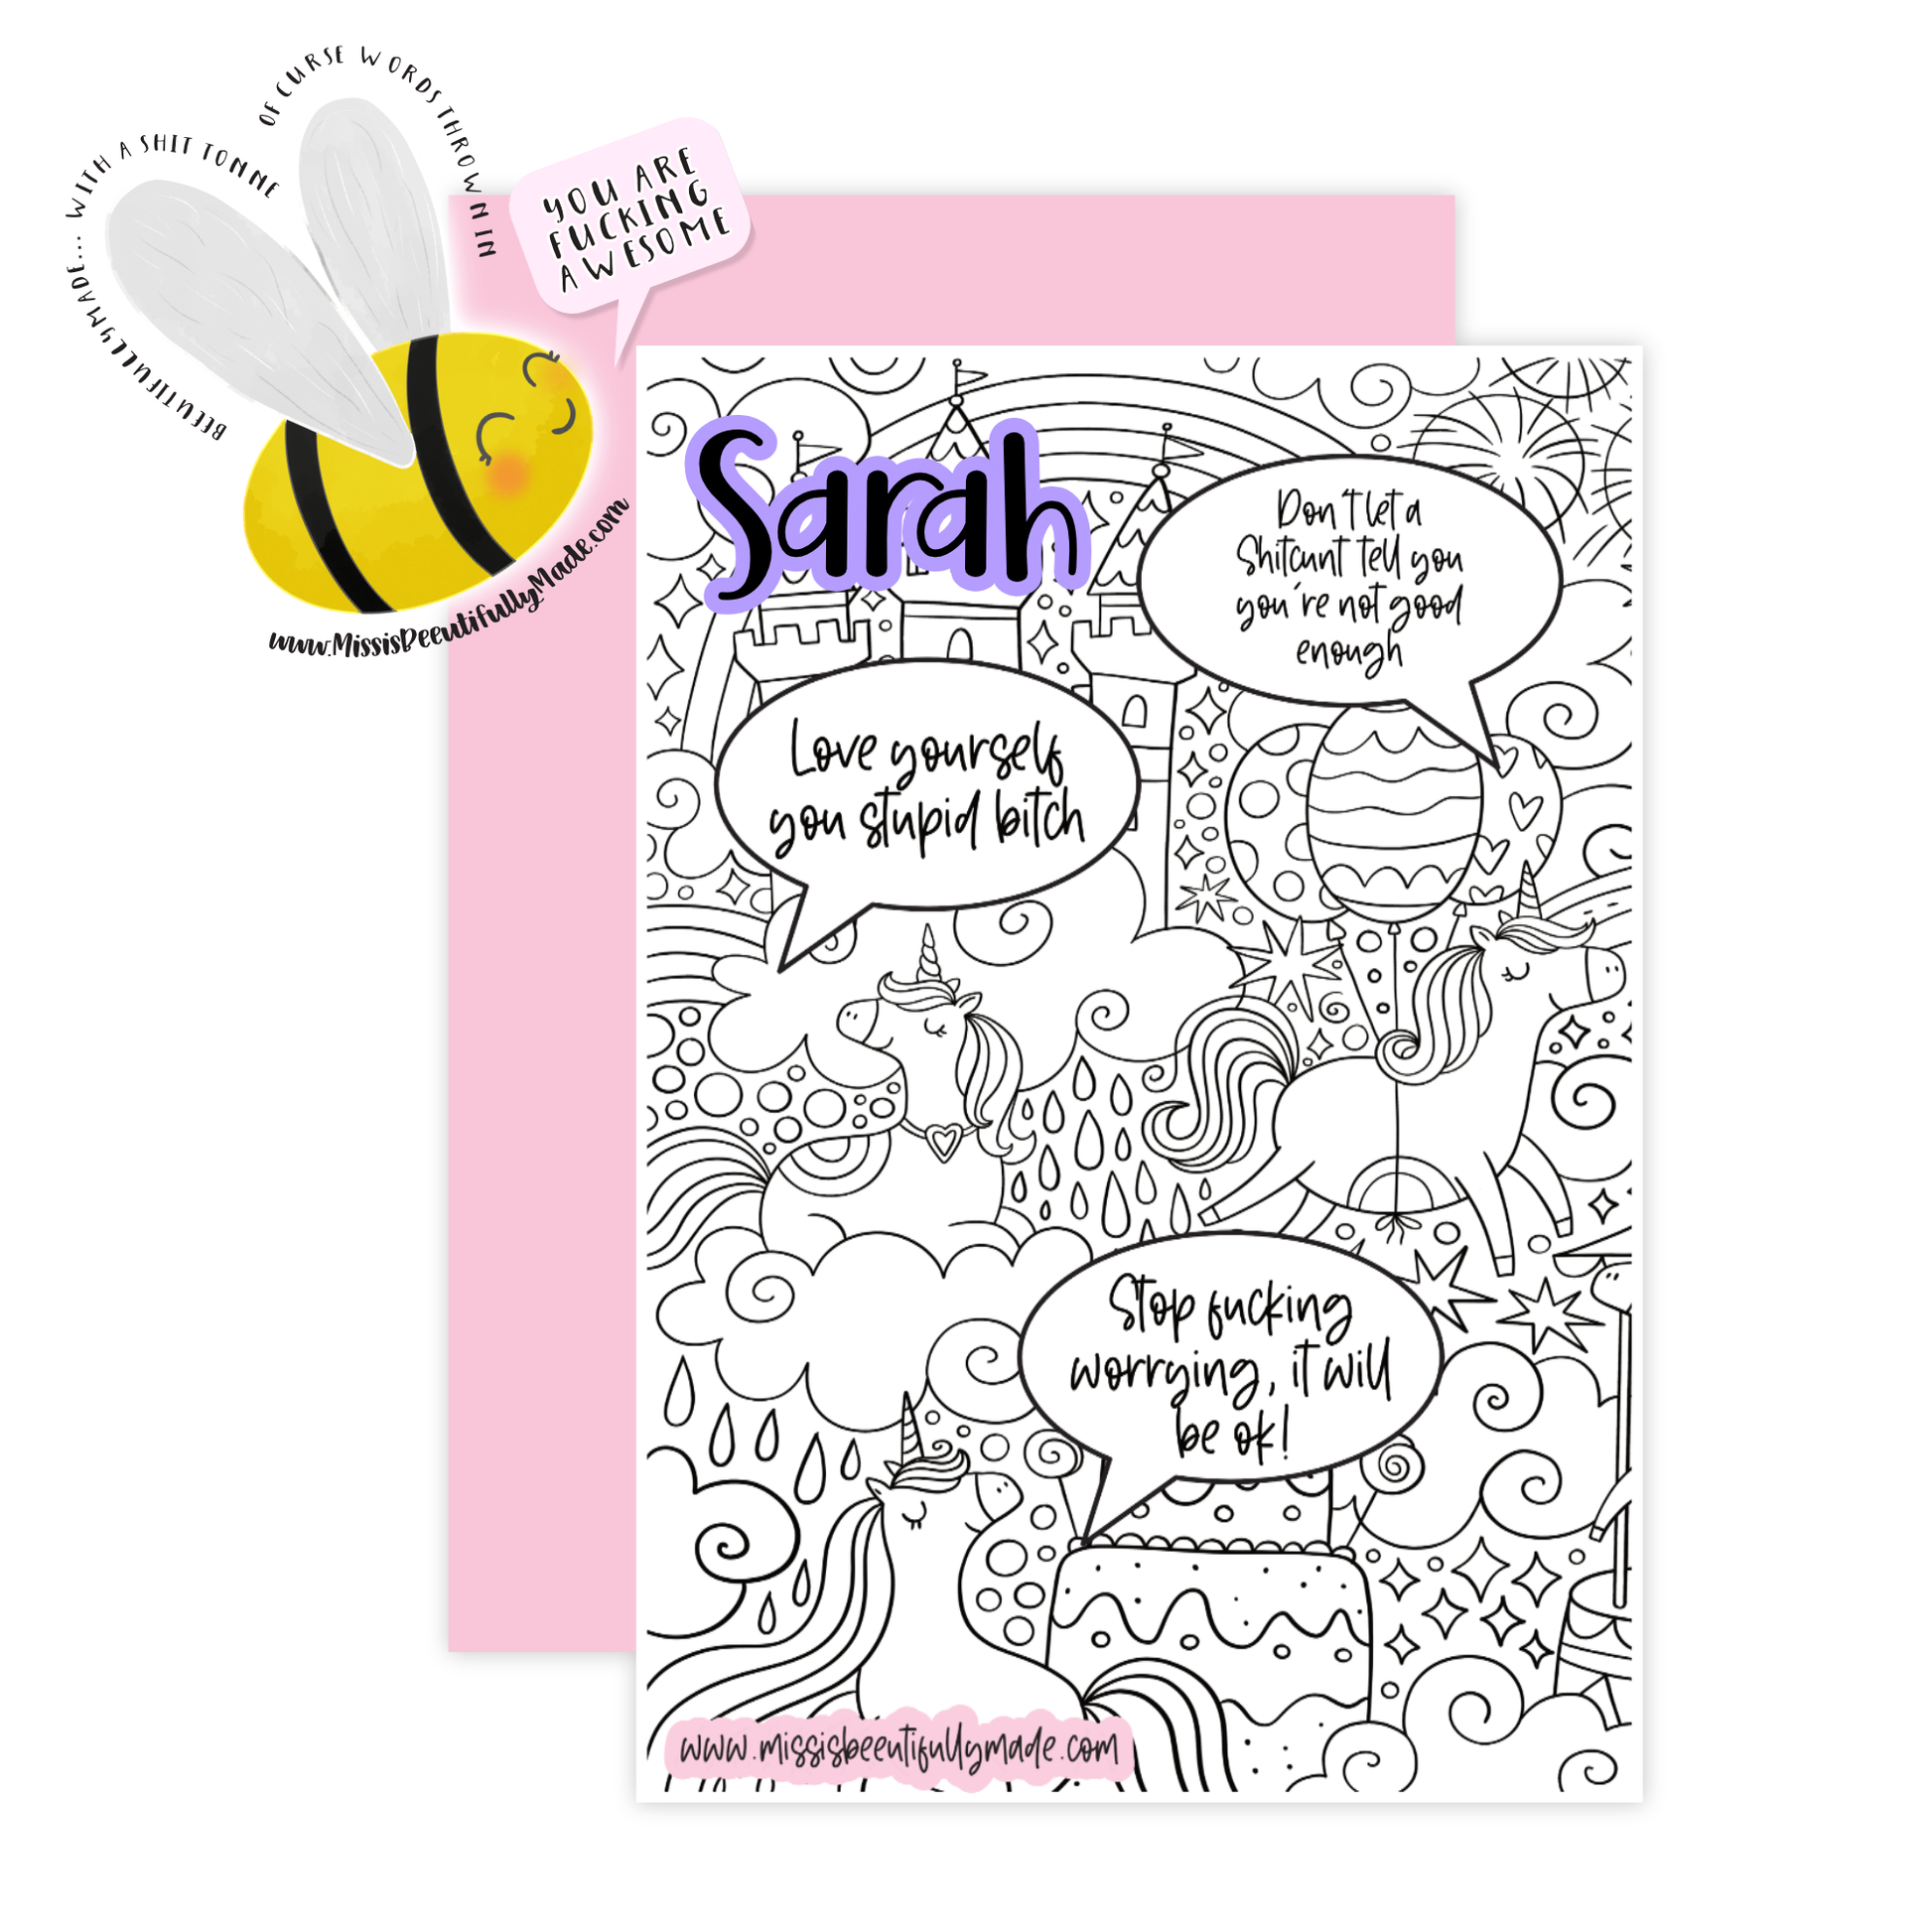 Funny greetings card with a unicorn drawing design. Each unicorn has speech bubbles that can be personalised to suit. A name can also be added to the card. Blank inside, supplied with white self seal envelope.